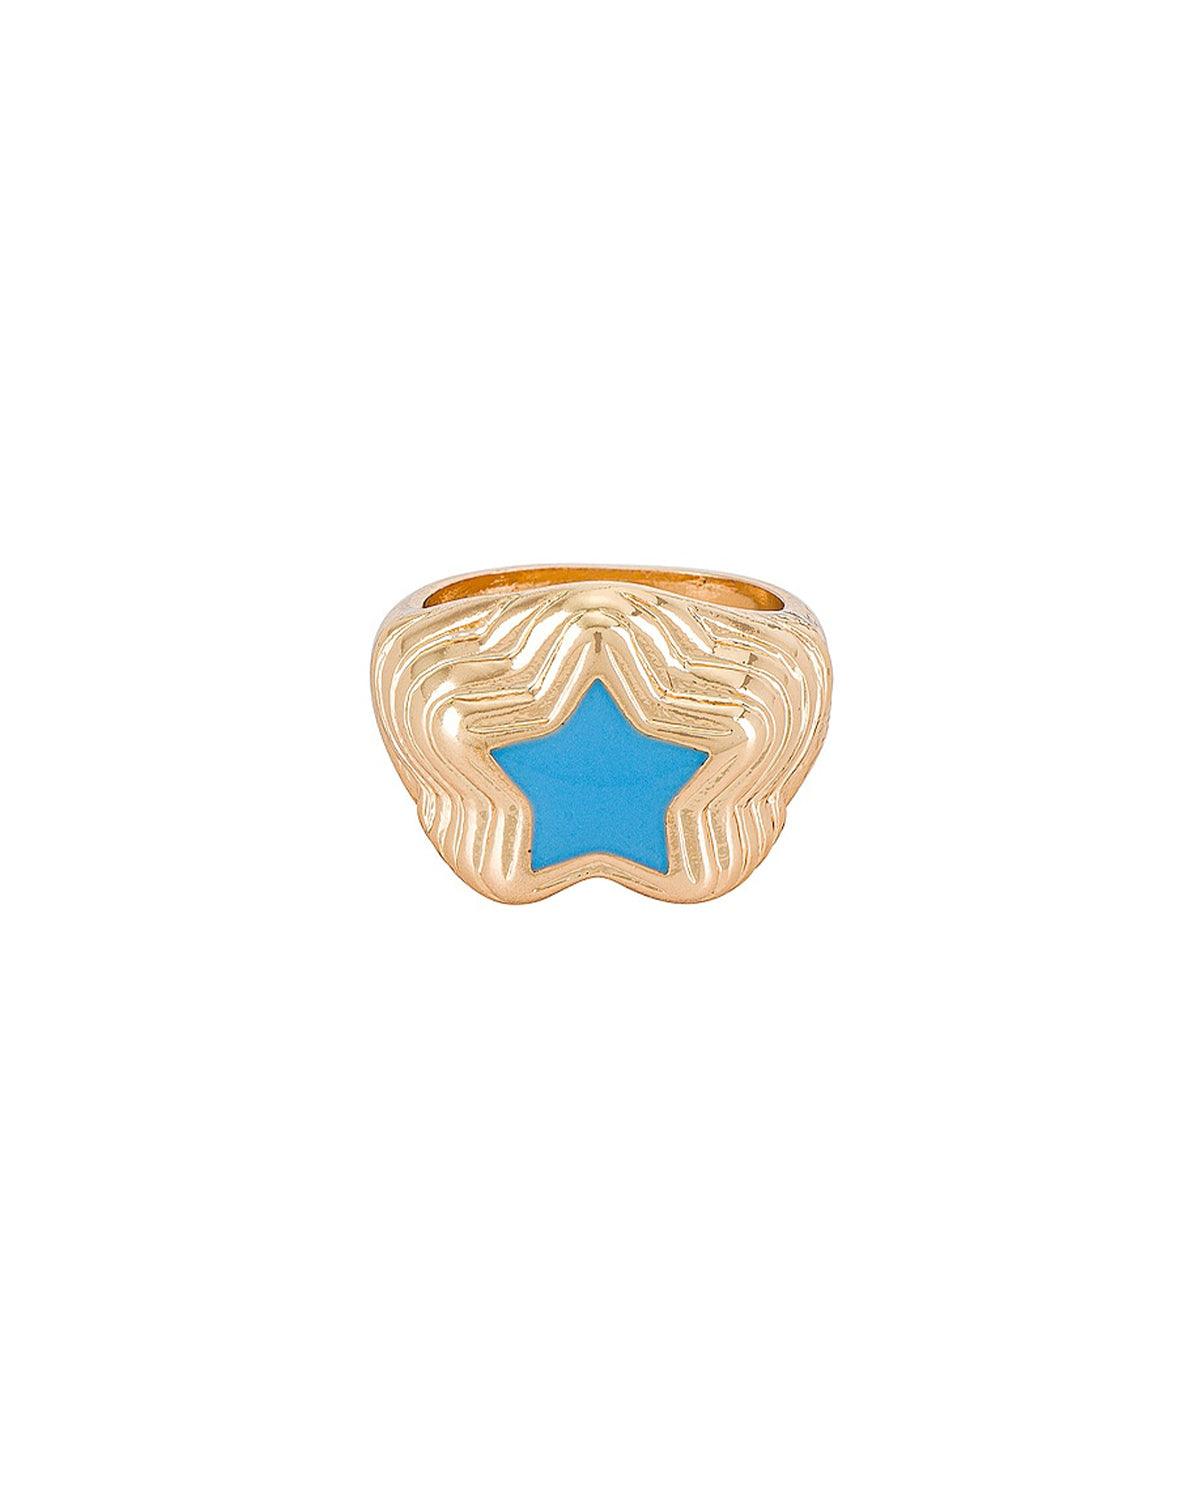 14k gold plated ring with blue star accent. Ring has riddles along the ring. 